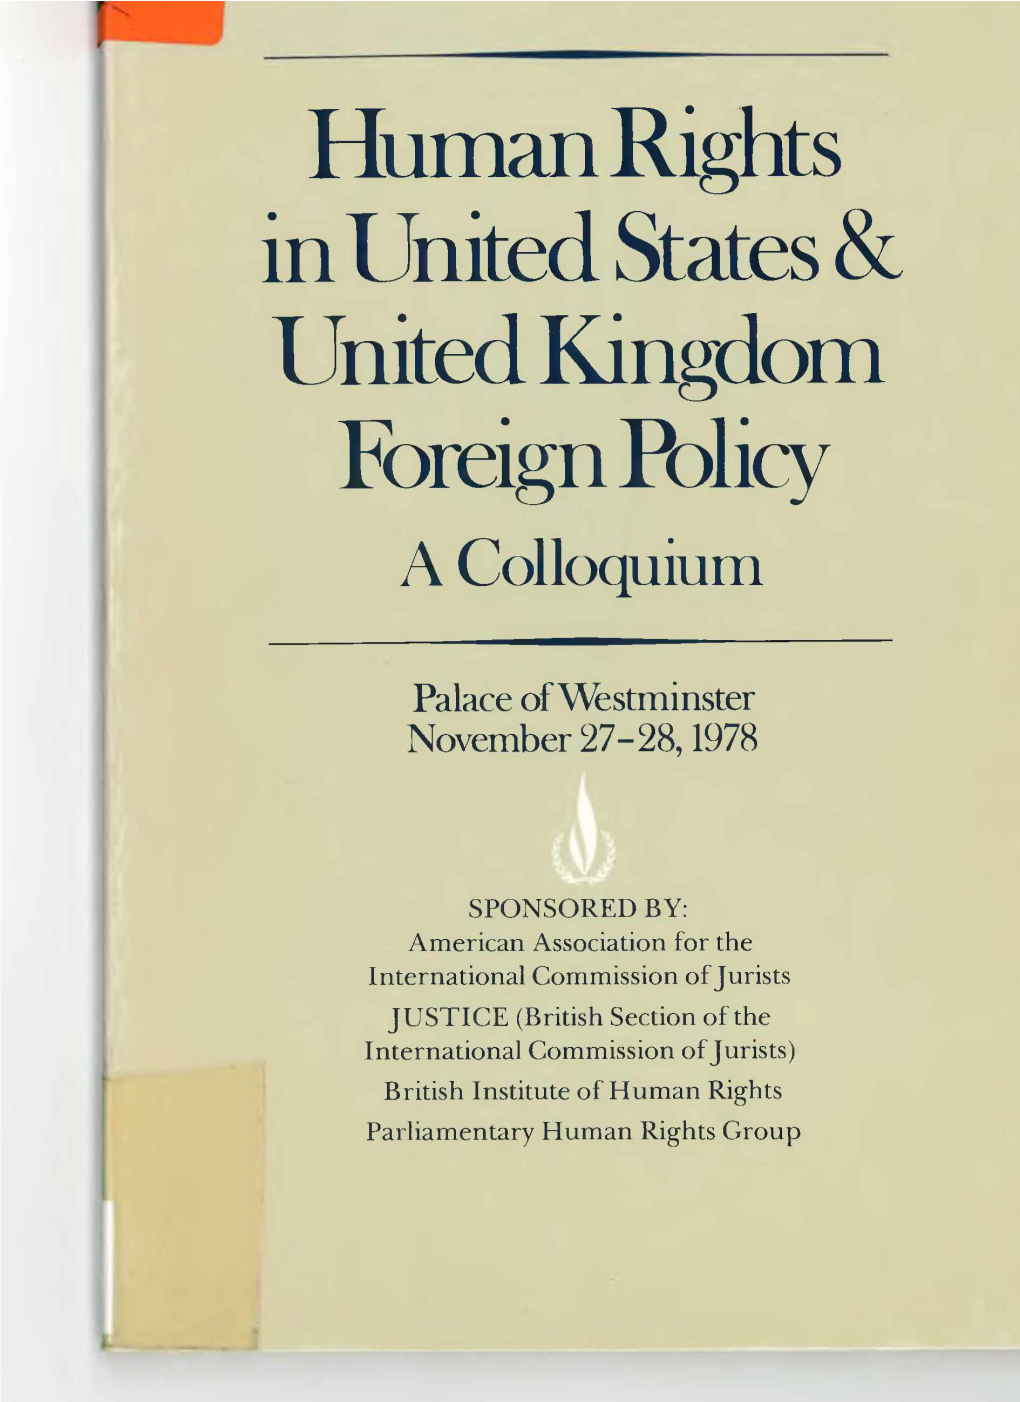 Human Rights in United States & United Kingdom Foreign Policy